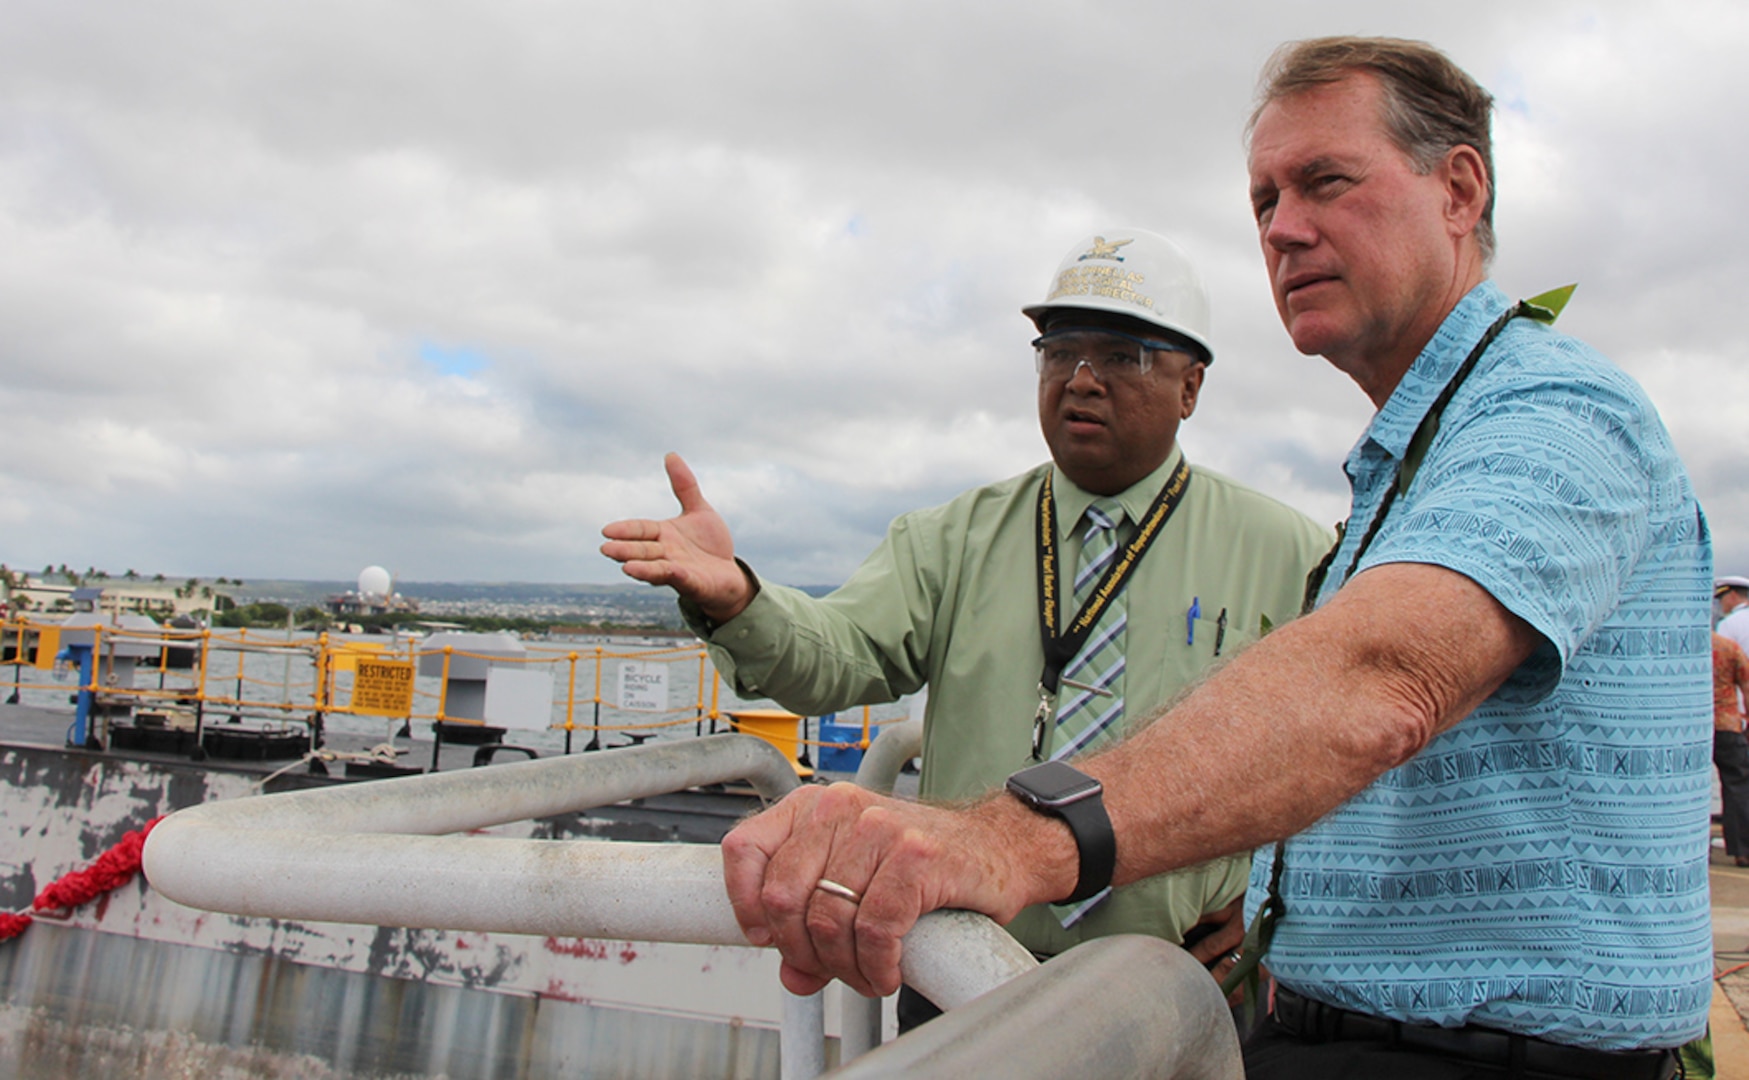 John Ornellas, PHNSY&IMF Director of Radiological Controls (left) explains the significance of Dry Dock One to Rep. Ed Case (right) during the Pearl Harbor Naval Shipyard’s centennial anniversary of Dry Dock One on Aug. 21, 2019, at Dry Dock One.